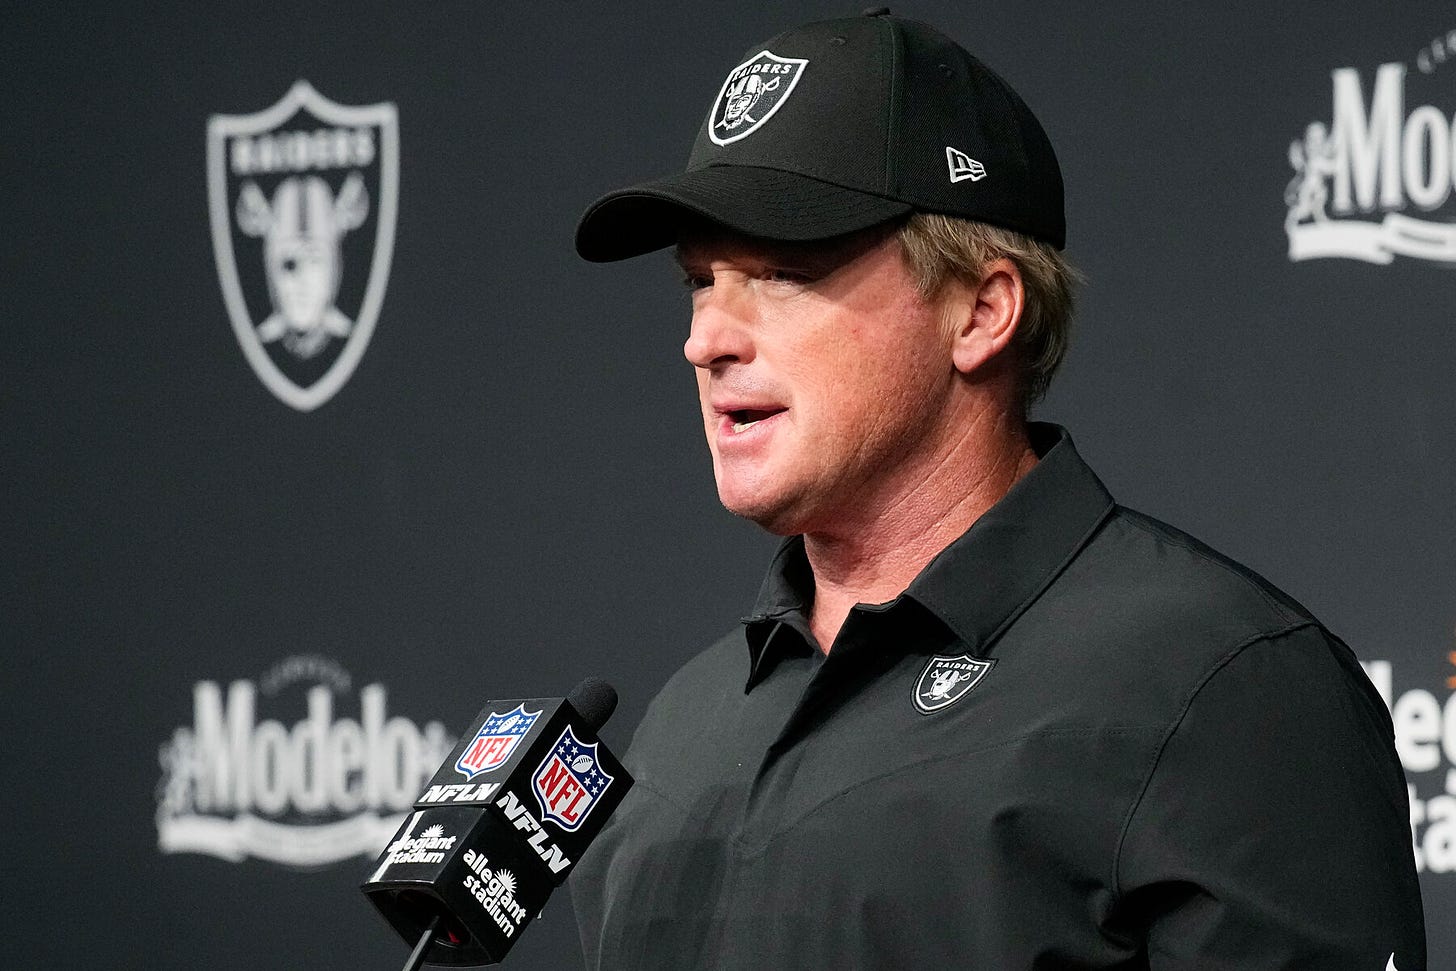 Jon Gruden Emailed Homophobic and Mysogynistic Comments - The New York Times